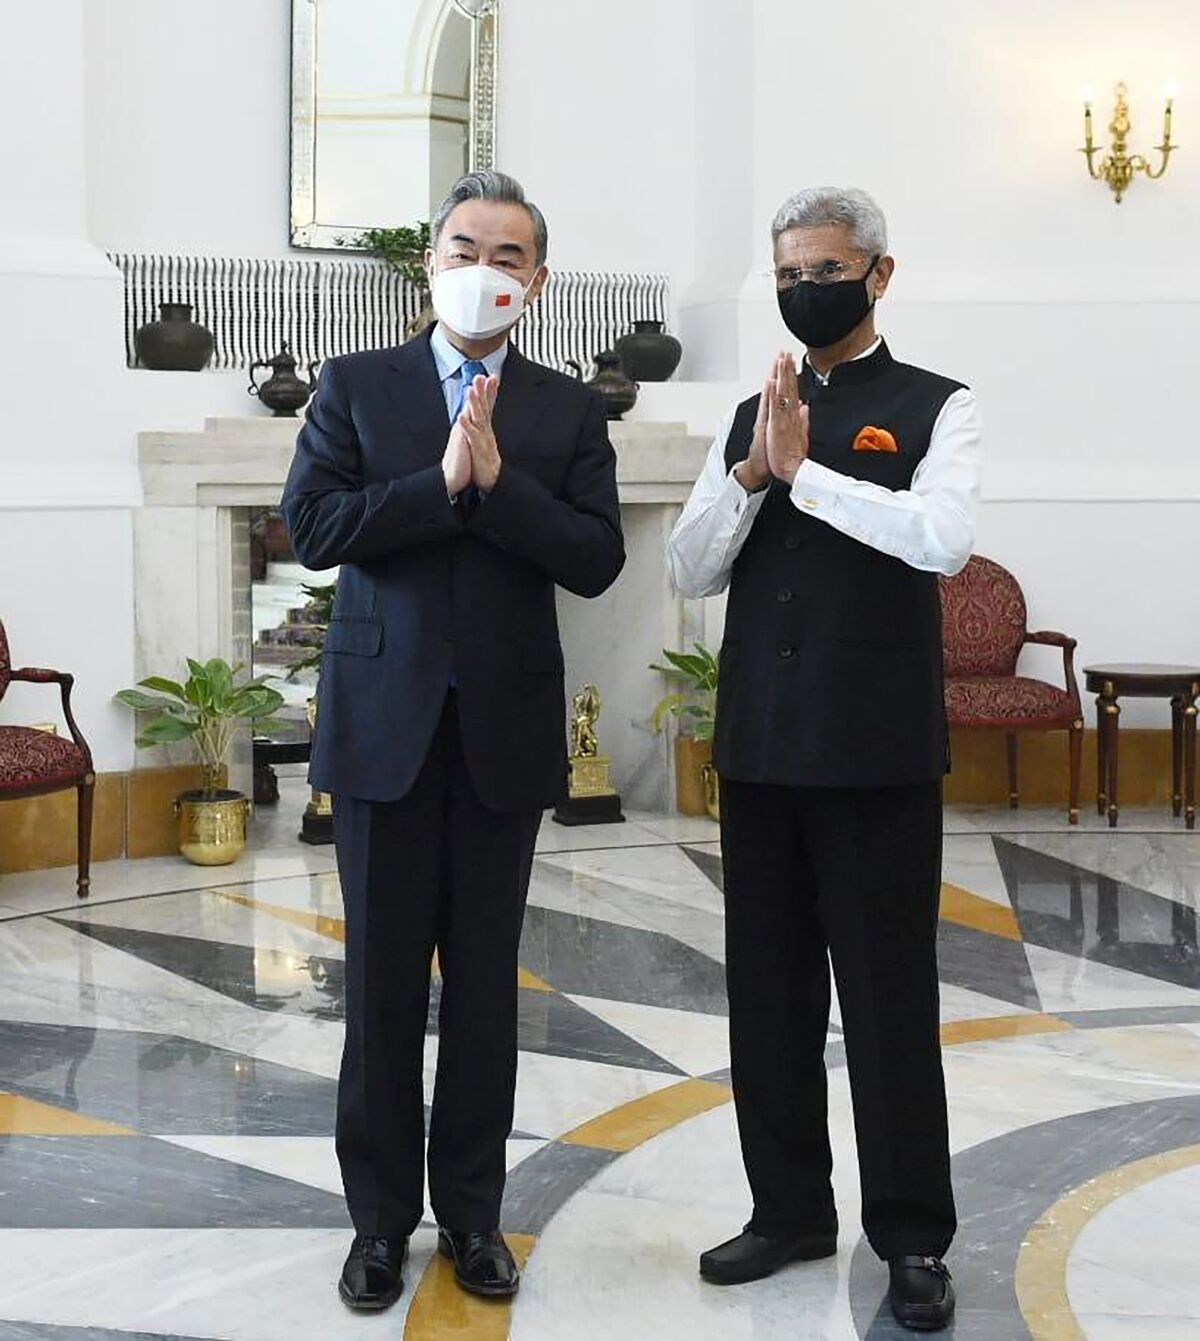 Two men wearing masks pose for a photo with their hands together